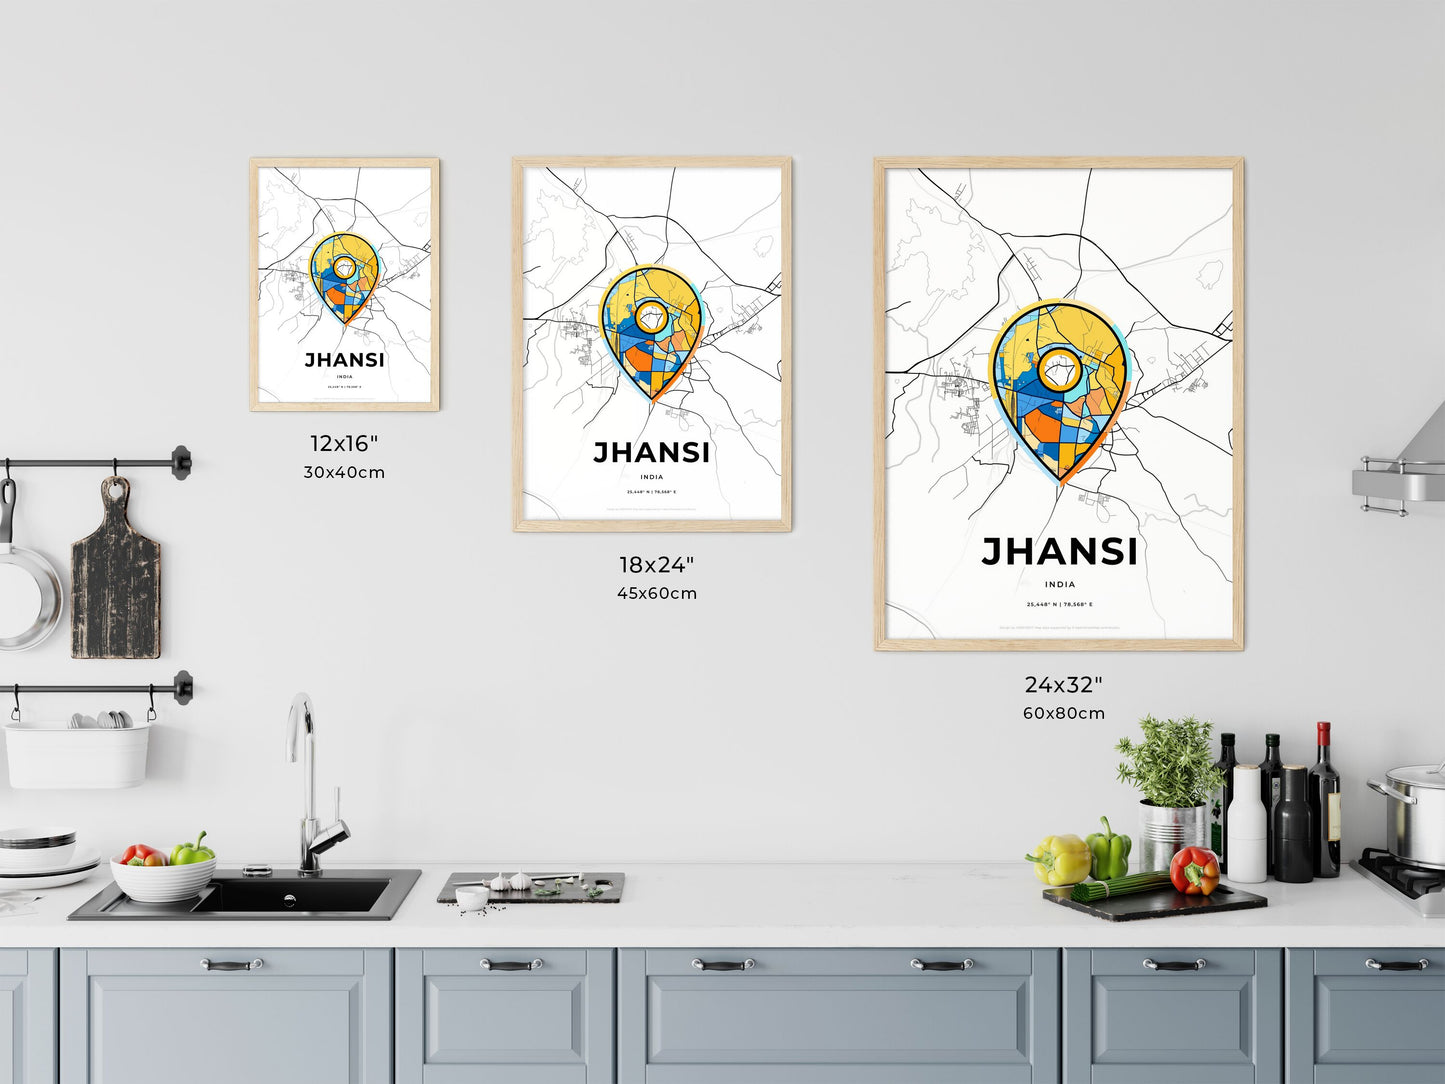 JHANSI INDIA minimal art map with a colorful icon. Where it all began, Couple map gift.